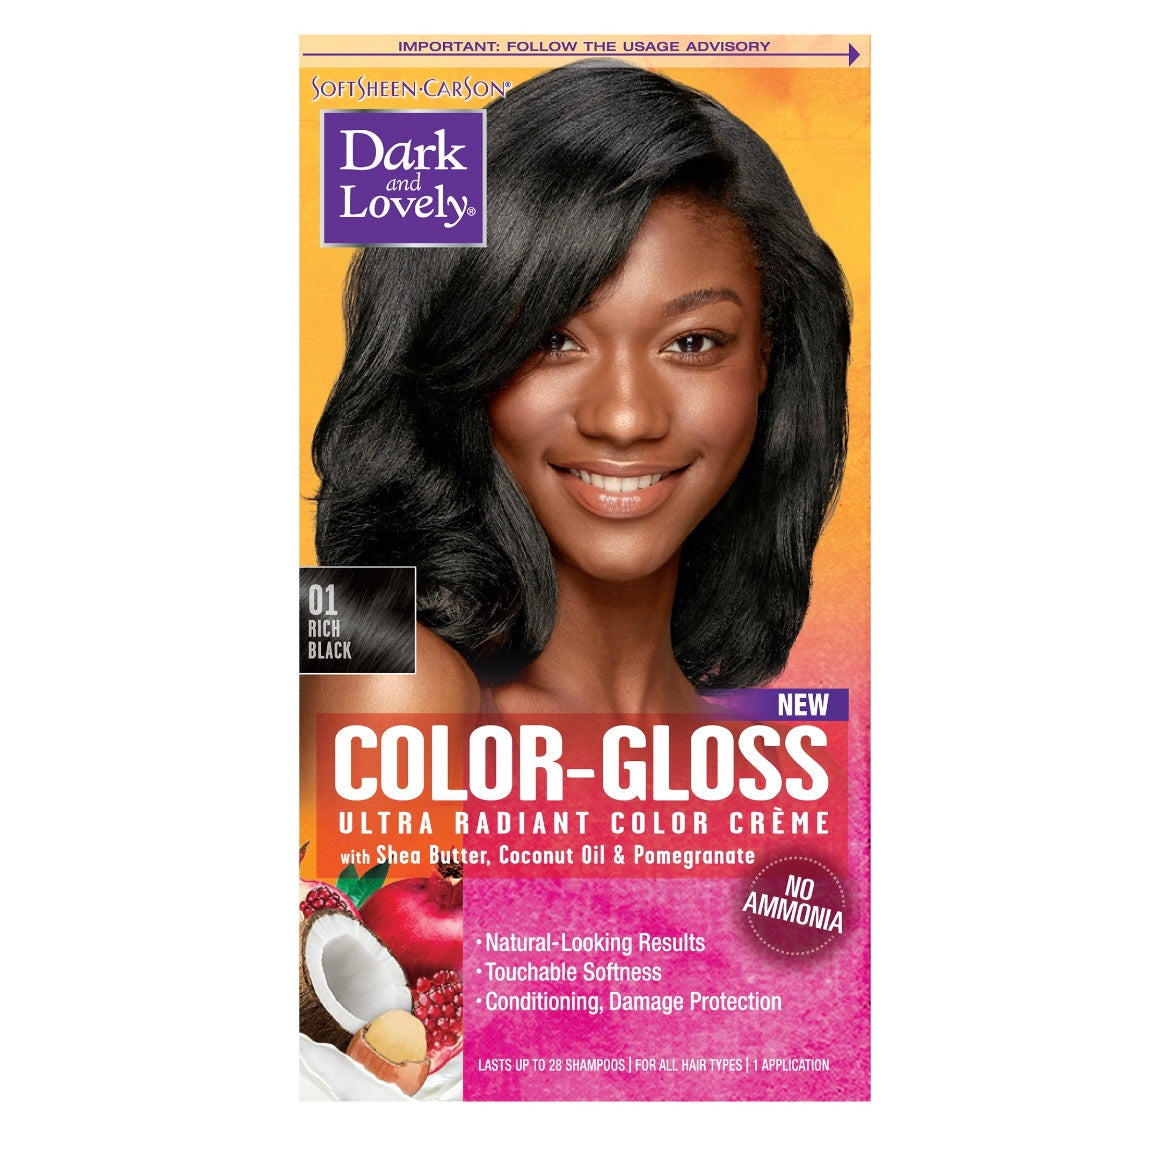 SoftSheen-Carson Dark and Lovely Color-Gloss Ultra Radiant Hair Color Creme, Ammonia Free Hair Dye, with Coconut Oil and Argan Oil